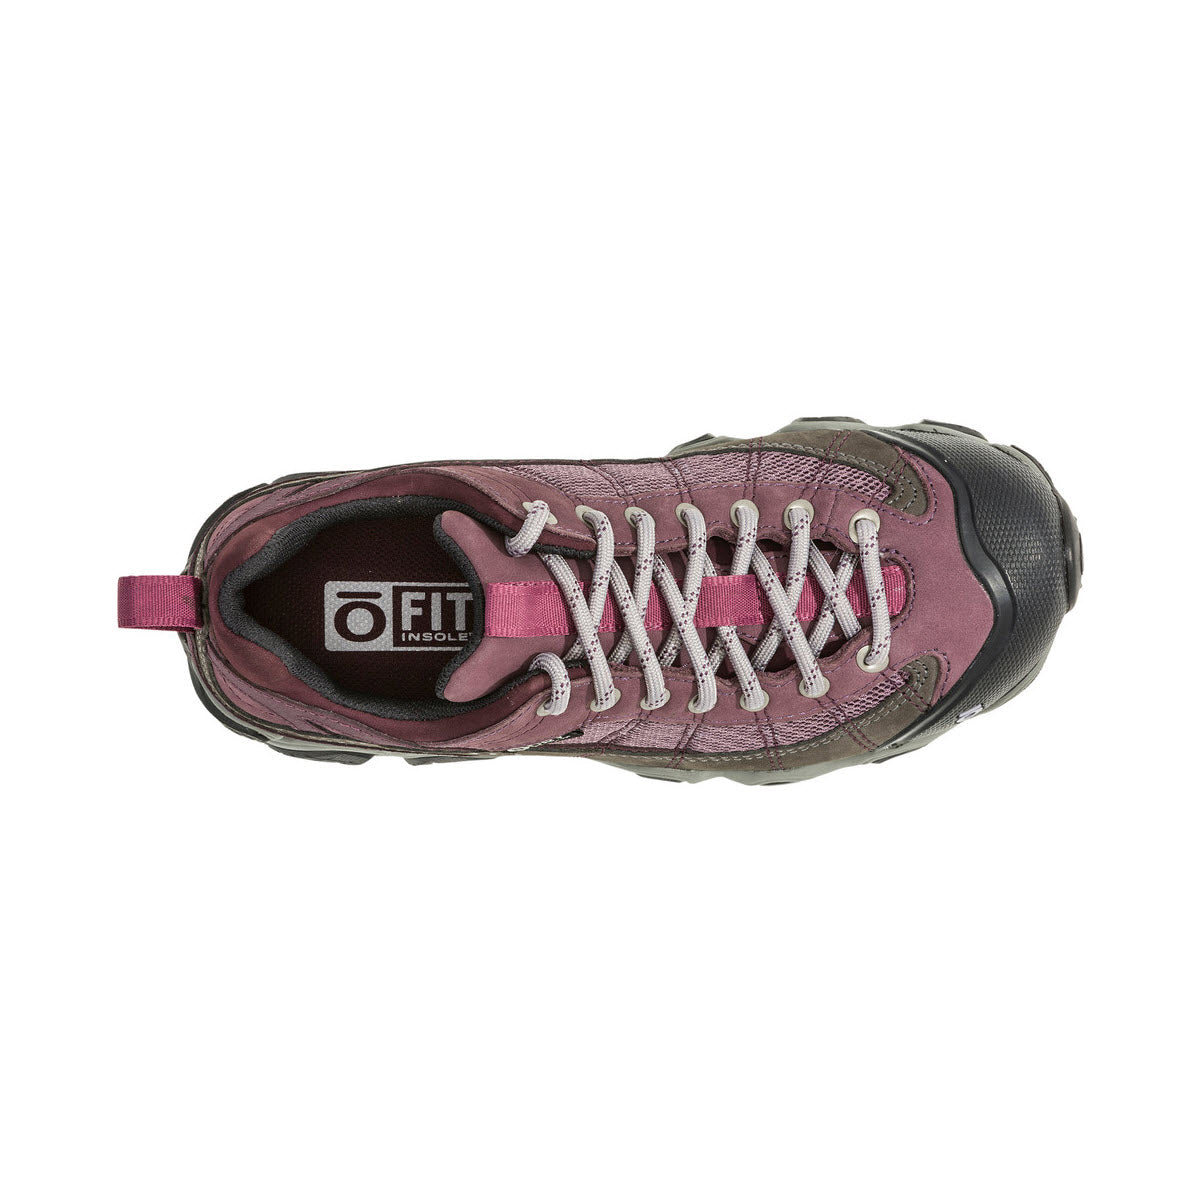 Top view of a single Oboz Firebrand II Low B Dry Lilac hiking shoe with pink laces and a loop on the heel, featuring a waterproof membrane.